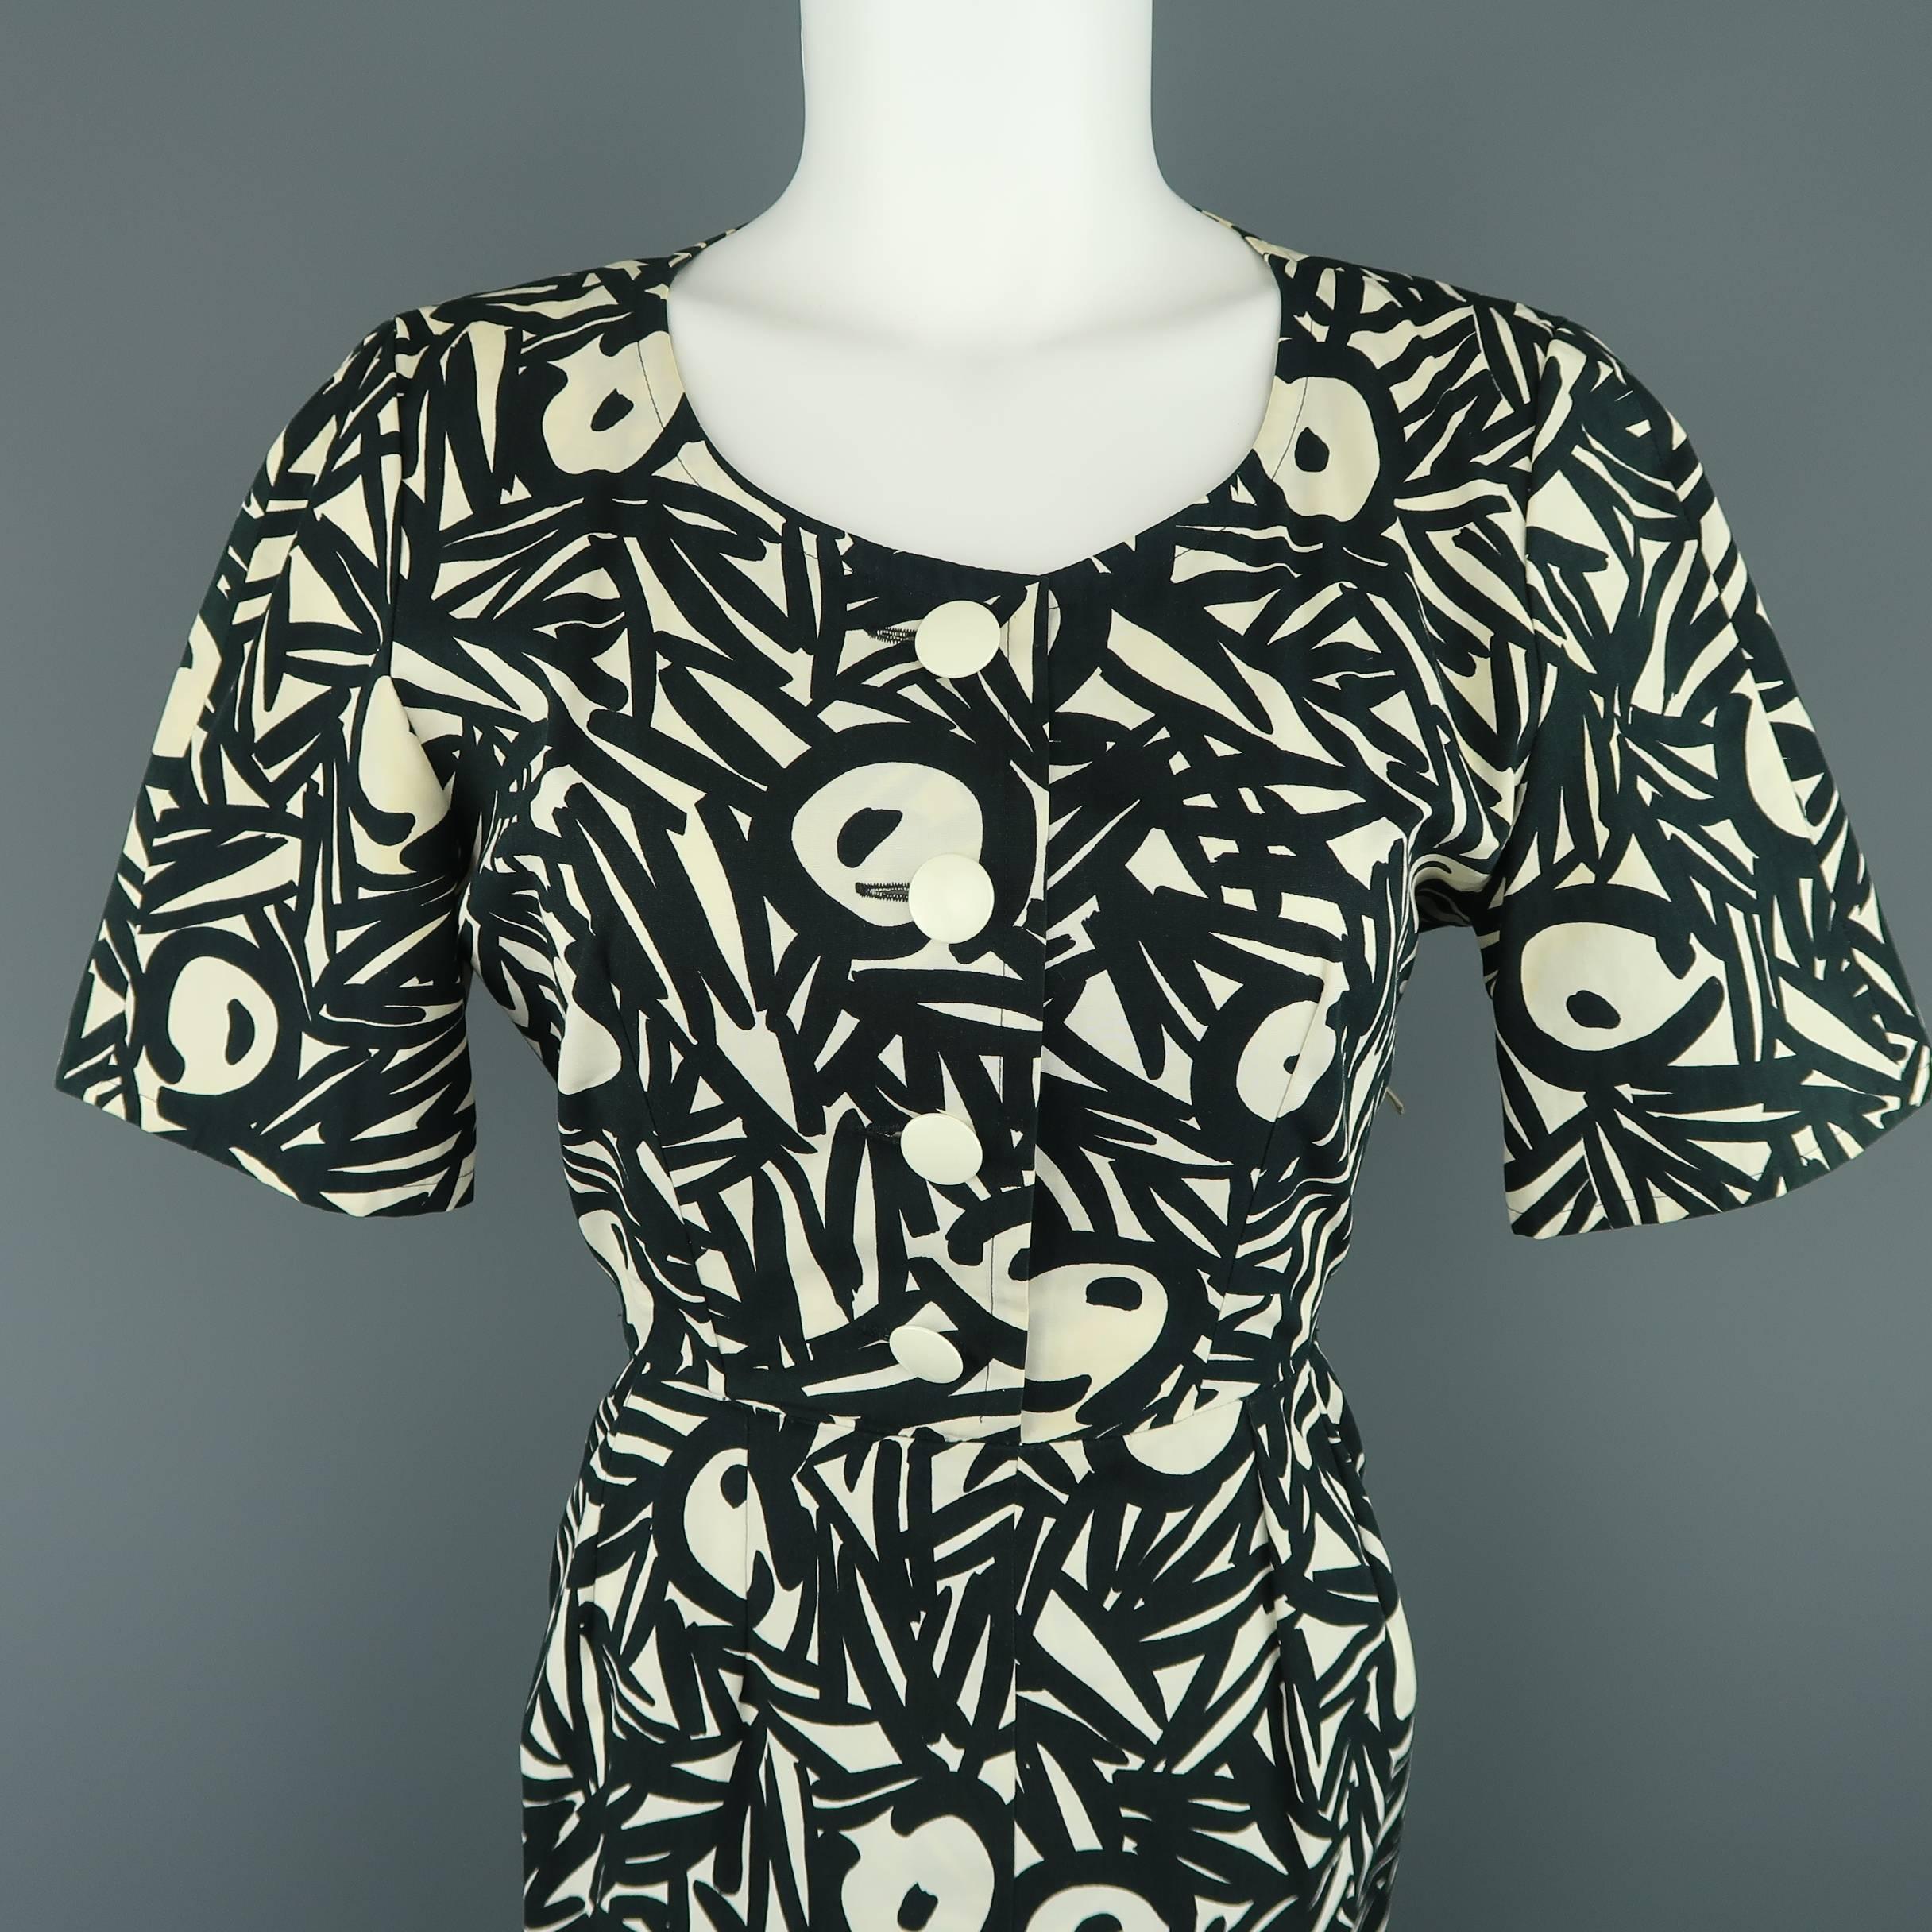 Vintage GUY LAROCHE dress comes in a black and cream abstract print cotton with a round scoop neck, button up blouse top, short puff sleeves, and pencil skirt. Discolorations throughout. As-is. Made in France.
 
Fair Pre-Owned Condition.
Marked: FR